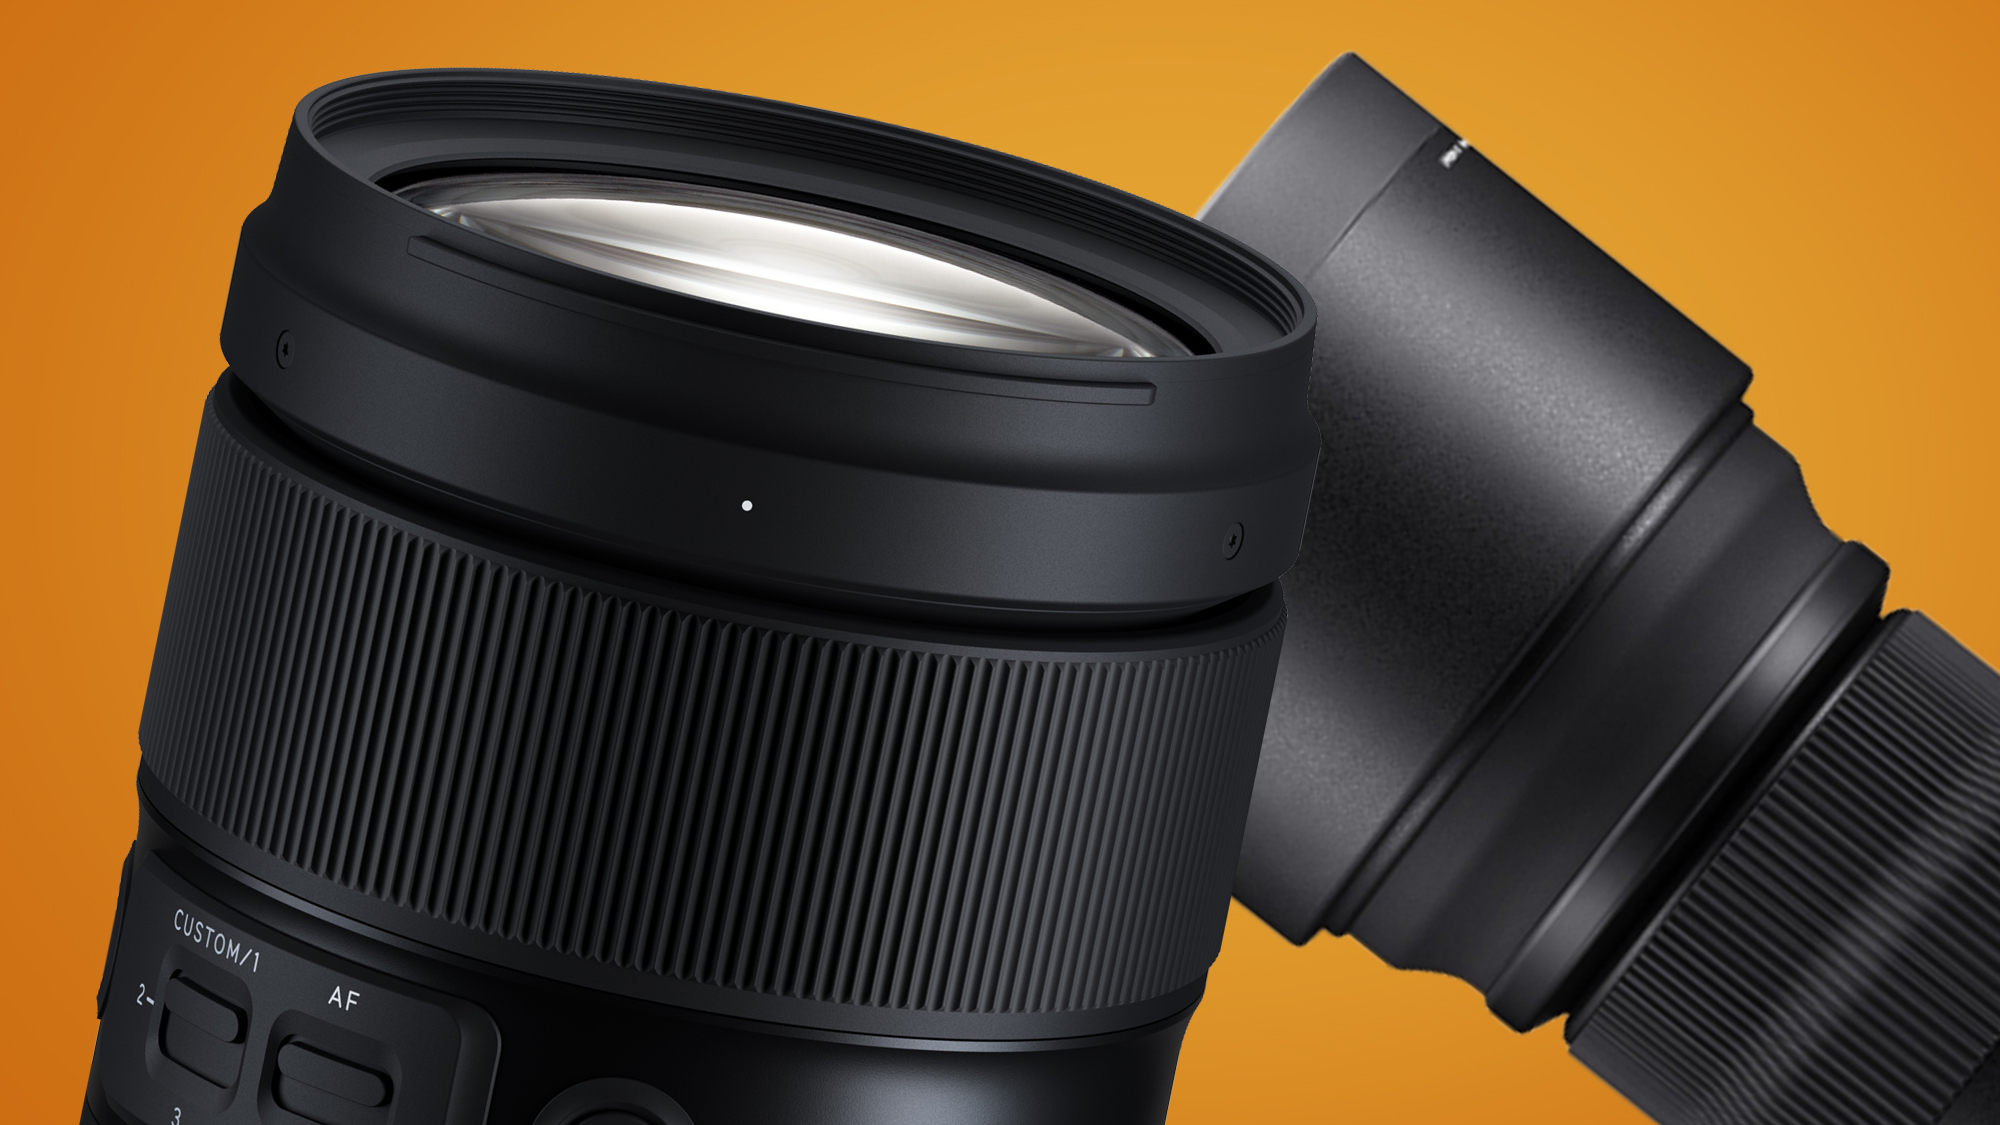 The Tamron 35-150mm f/2-2.8 in front of a Sigma lens on an orange background